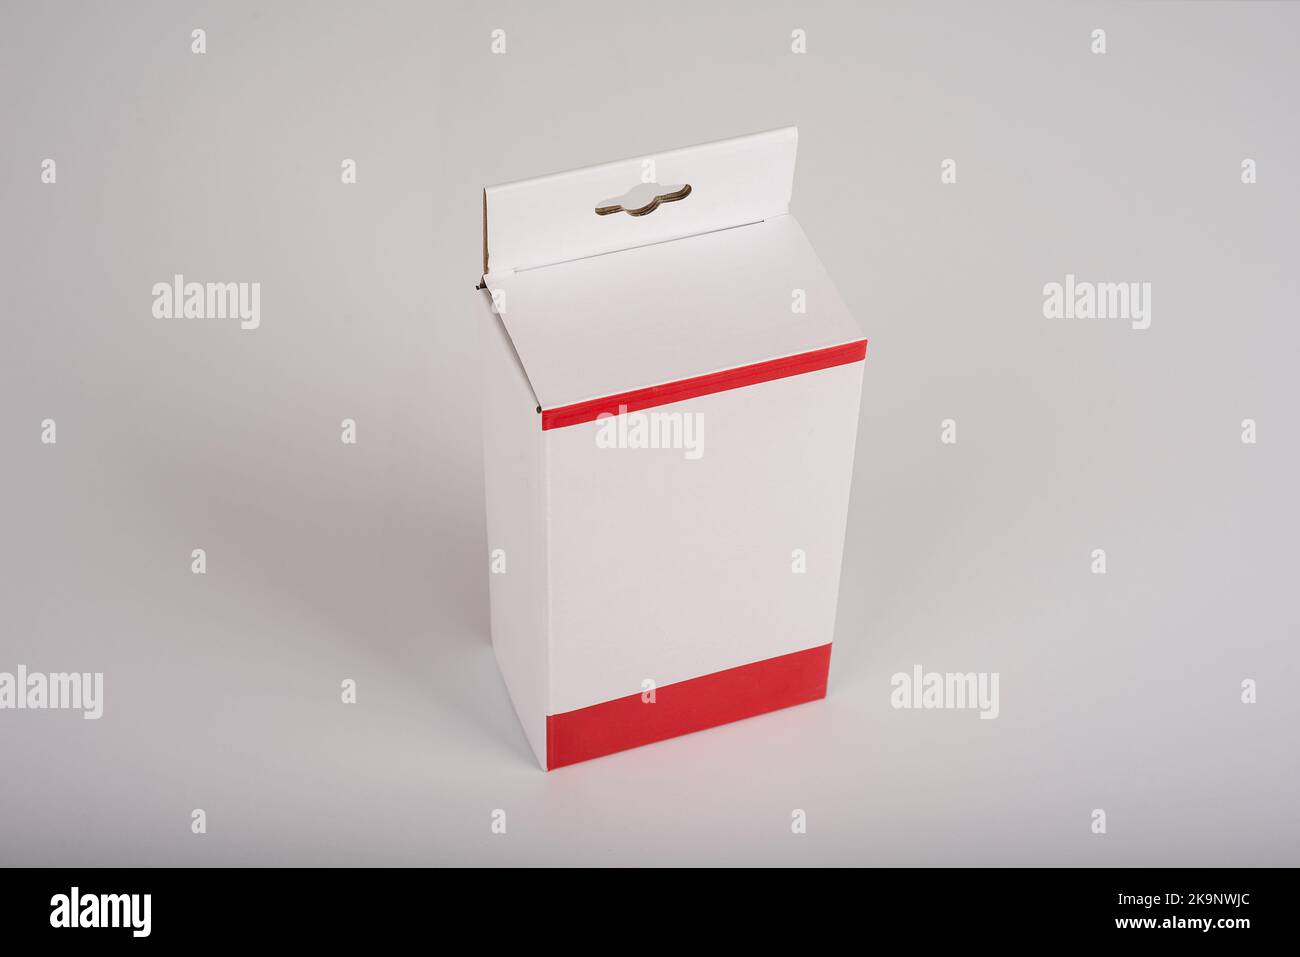 White Paper Packaging Box With a Hanging Hole Stock Photo